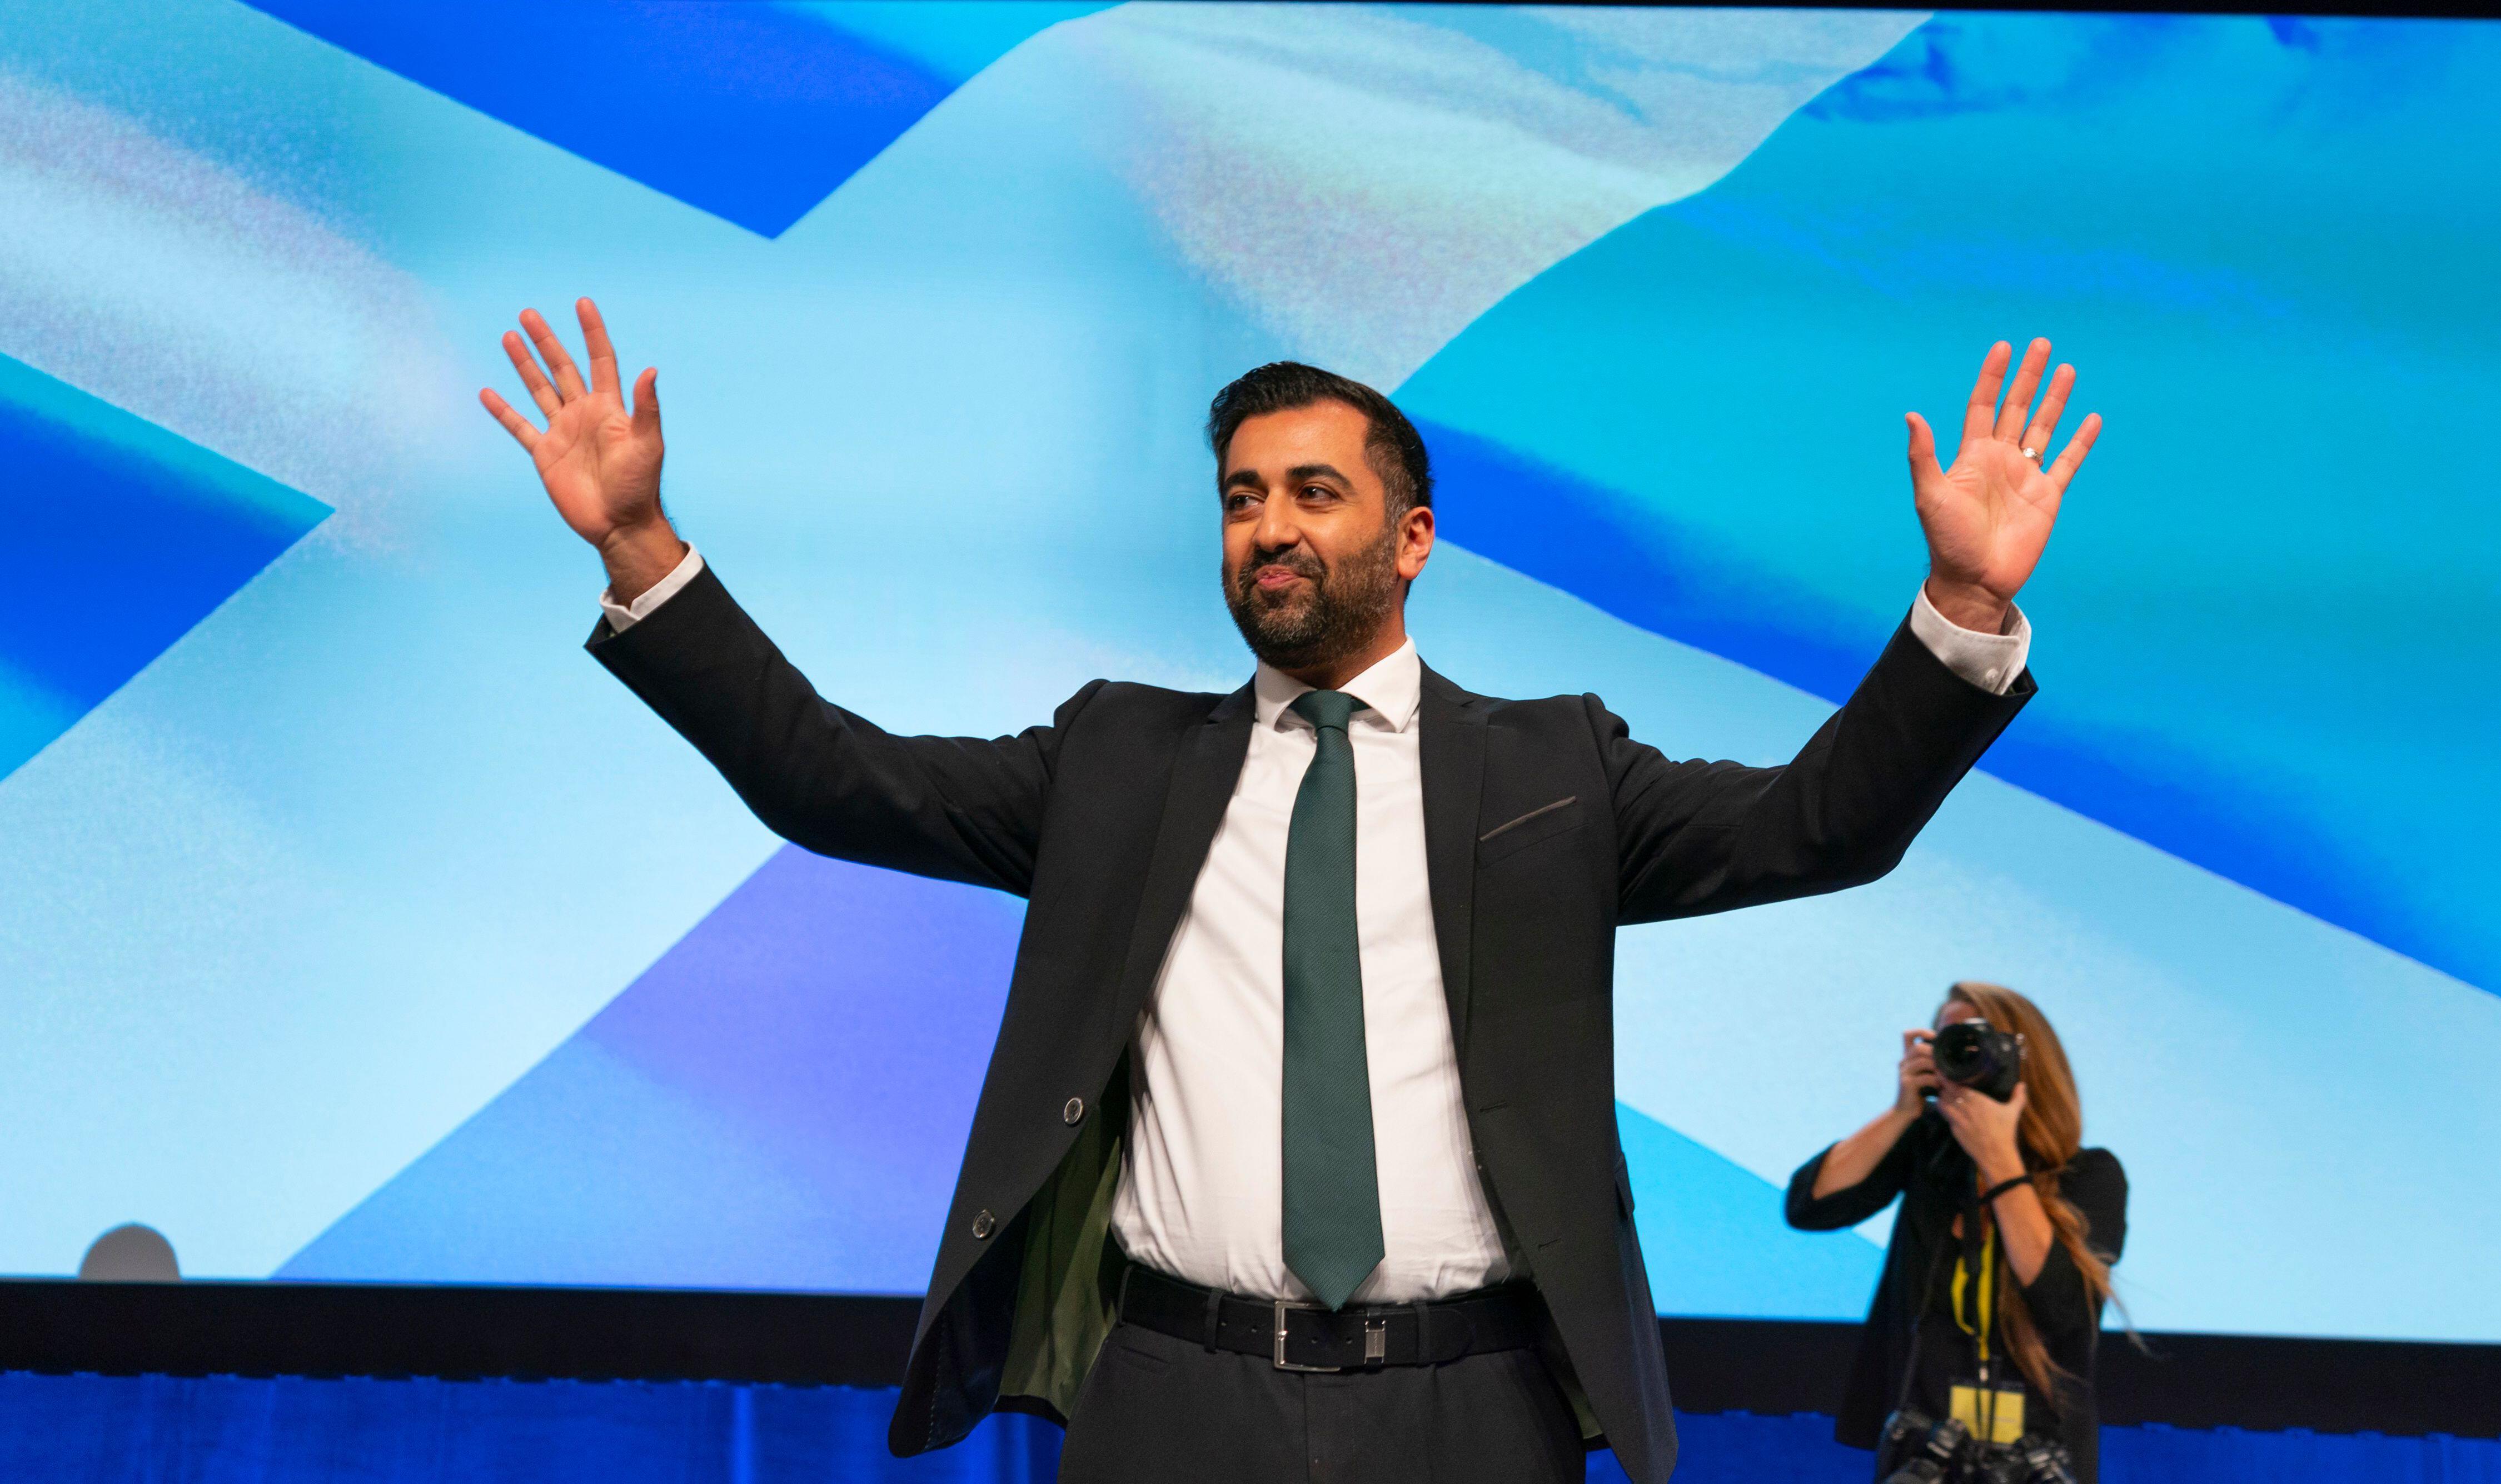 Humza Yousaf being photographed waving at a crowd with the Scottish flag in the background.